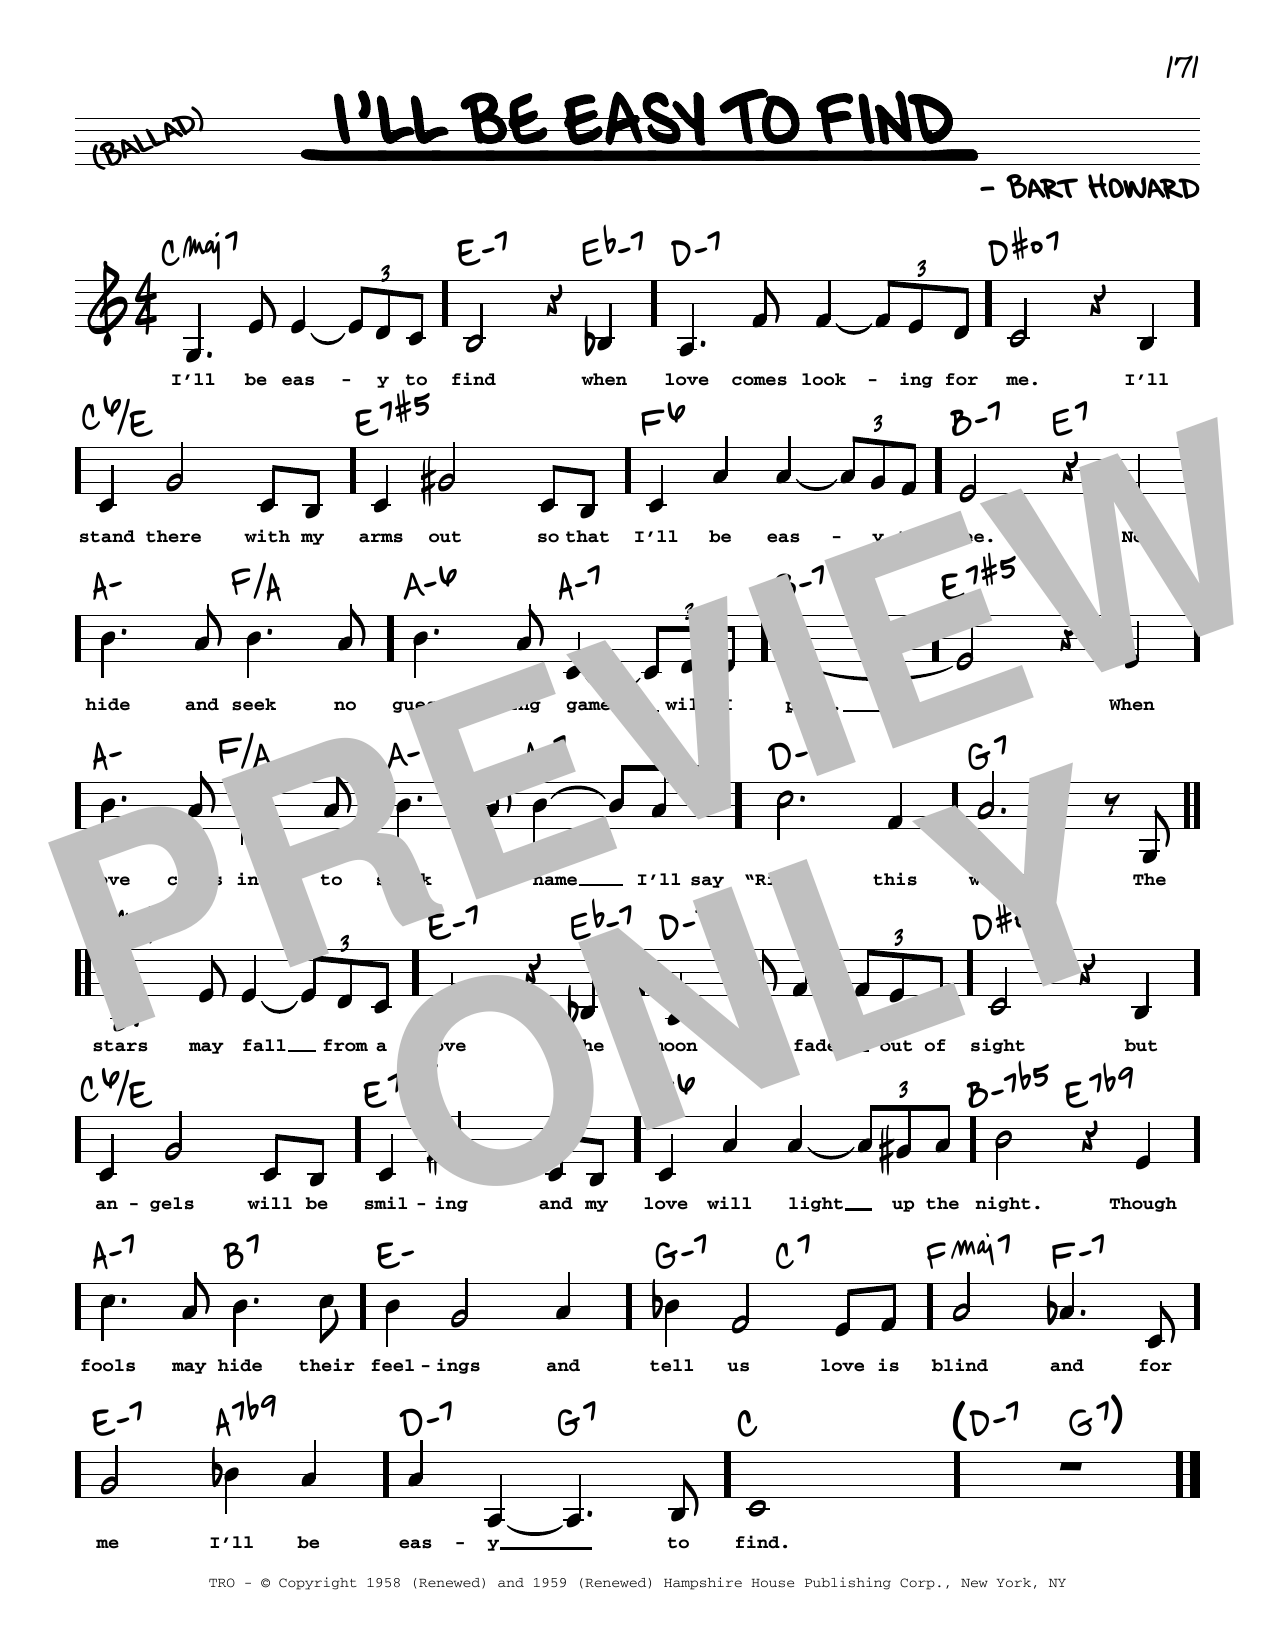 Bart Howard I'll Be Easy To Find (Low Voice) sheet music notes printable PDF score